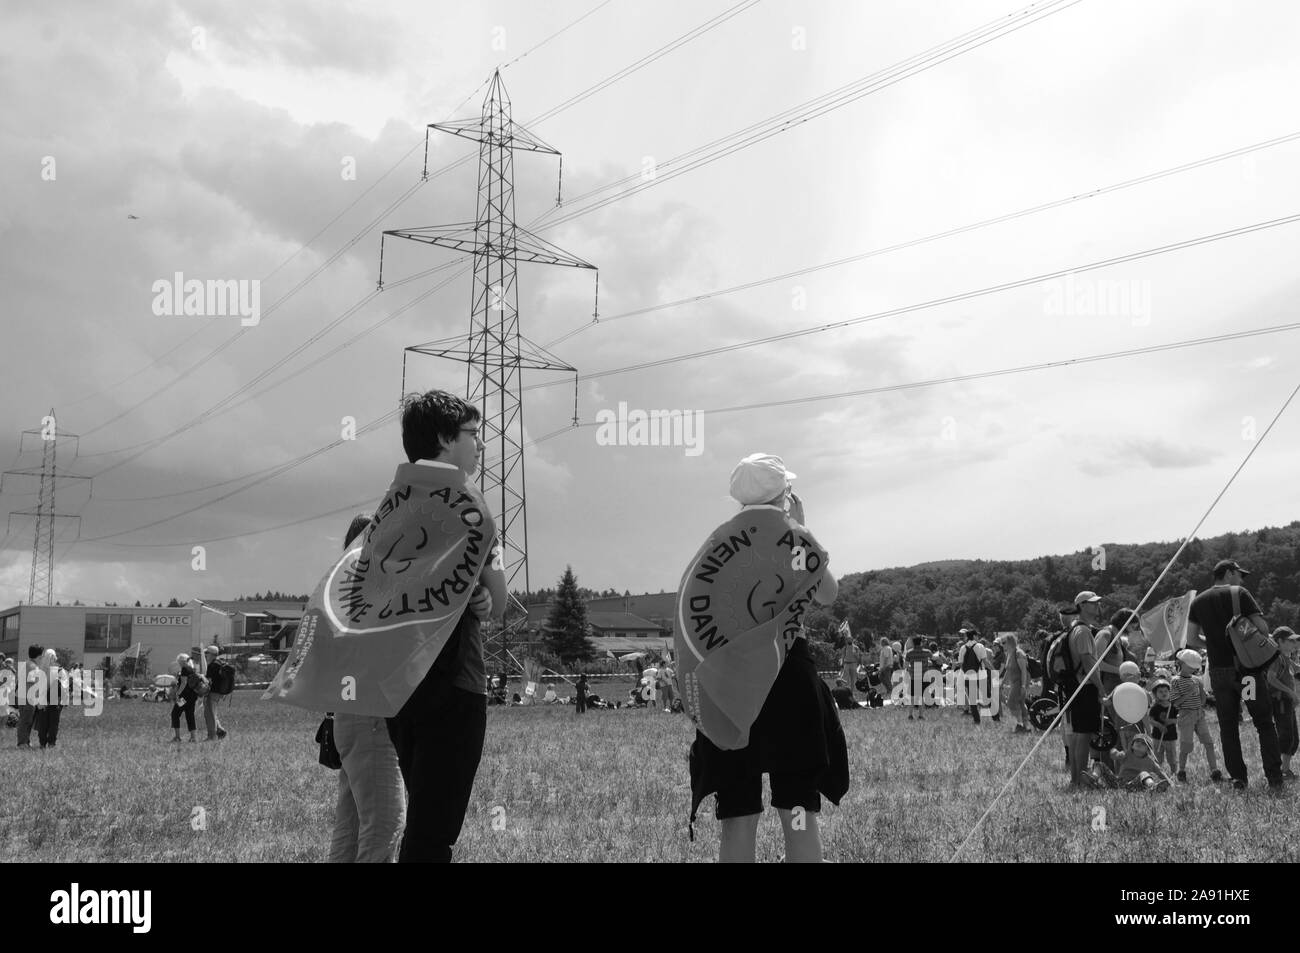 Beznau: Over 20'000 people joined the anti nuclear power demonstration in Switzerlands 'atomic valley'. Stock Photo